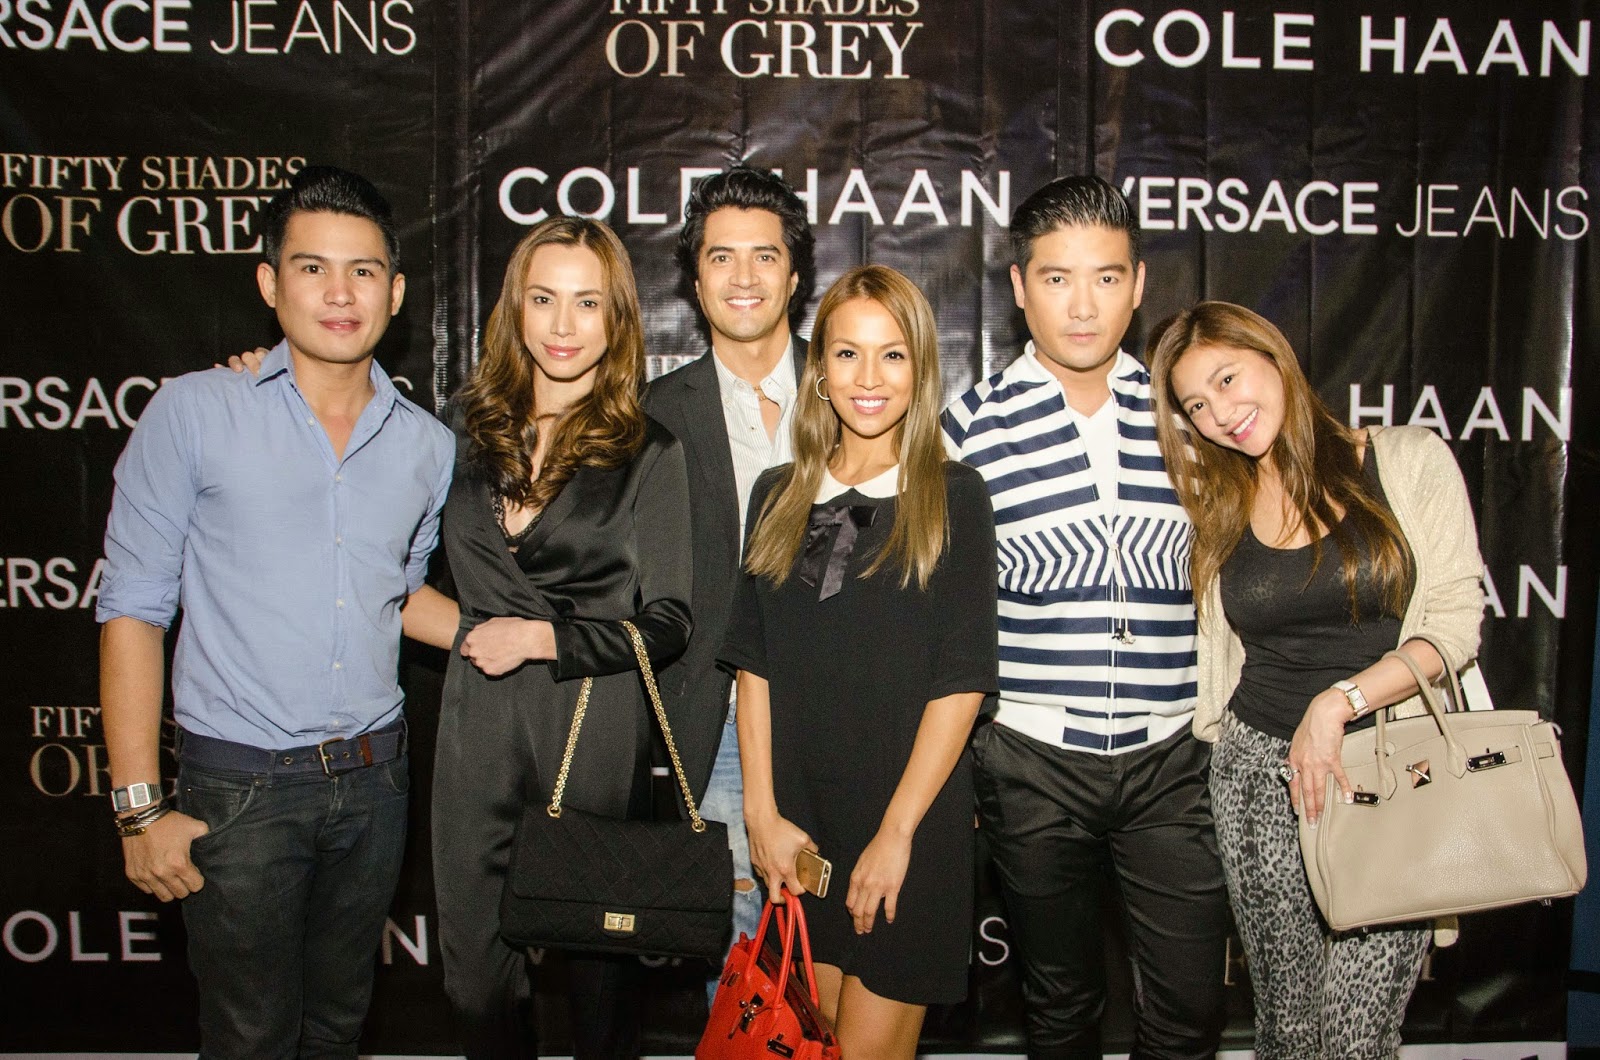 Rockstarmomma: Star-Studded Premiere of Fifty Shades of Grey by Versace  Jeans and Cole Haan